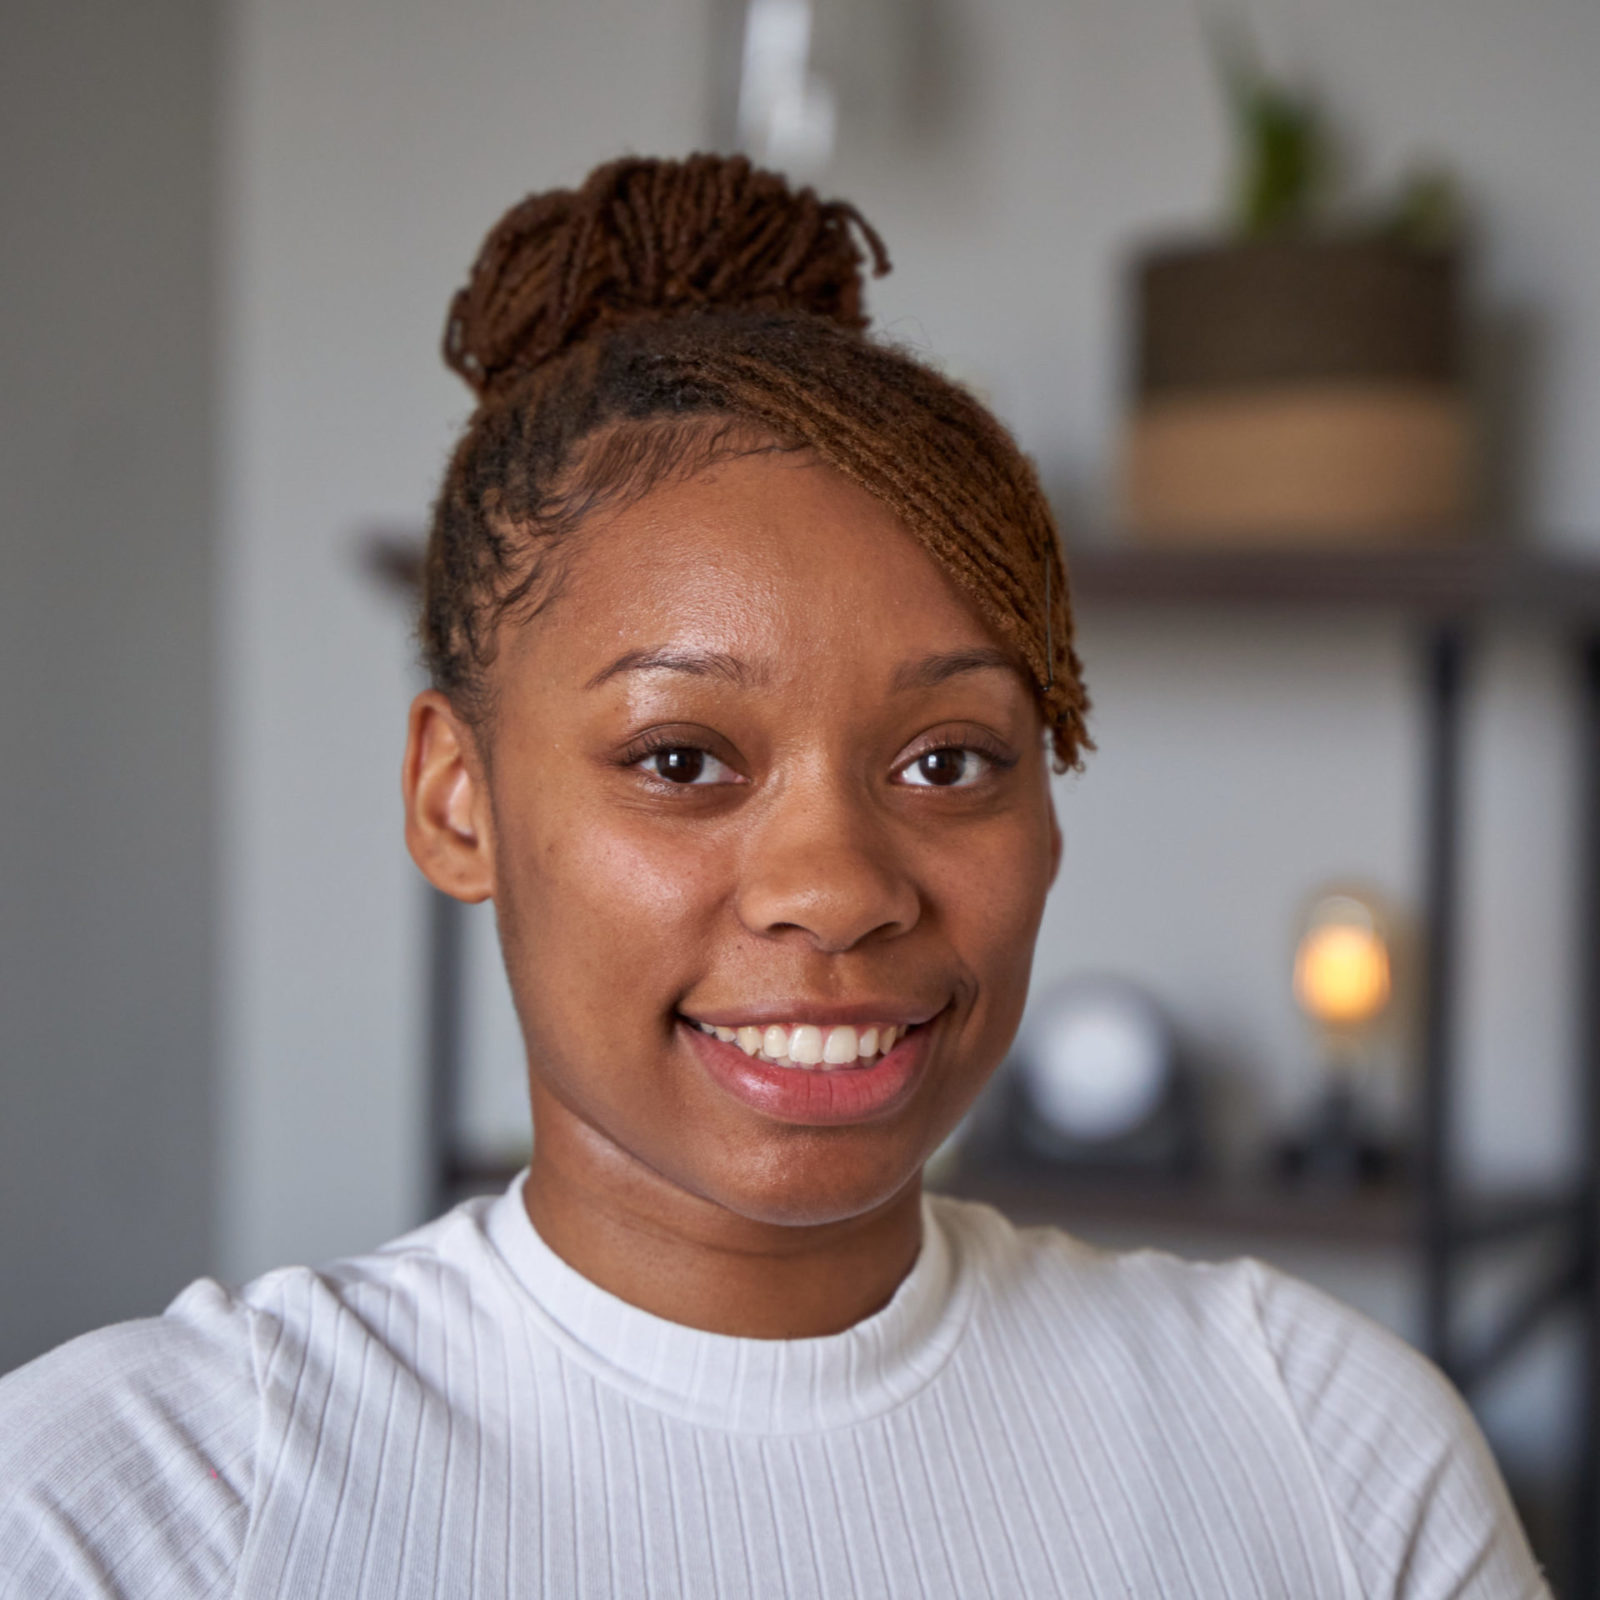 Sabree Wright, therapist in Philadelphia with brown hair and brown eyes. Sabree is wearing white shirt with her hair in a bun. Sabree is looking at the camera smiling in an office at The Better You Institute with a shelf and light in the background.